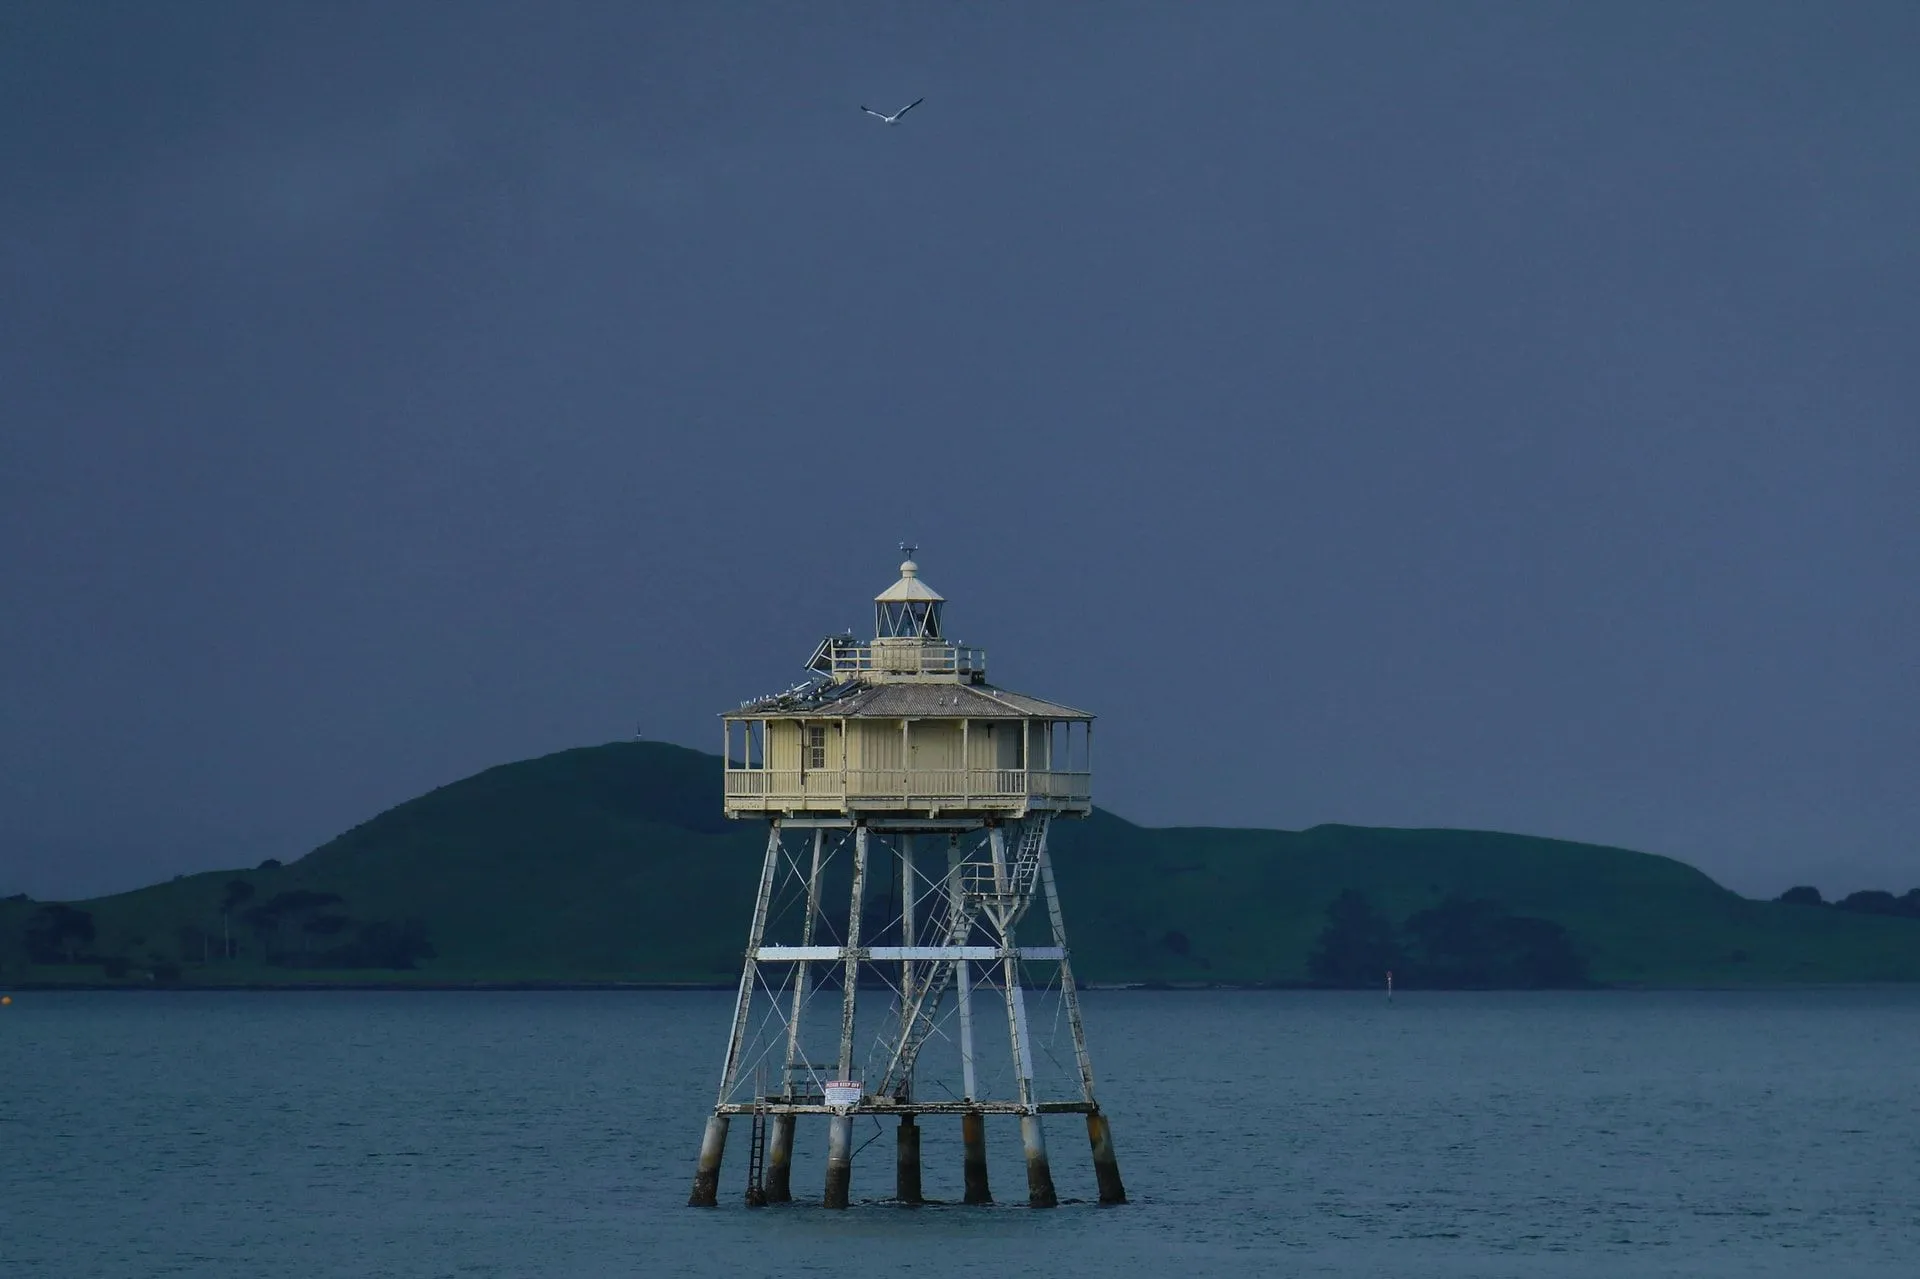 The Bean Rock Lighthouse is situated in the Waitemata Harbour in Auckland.